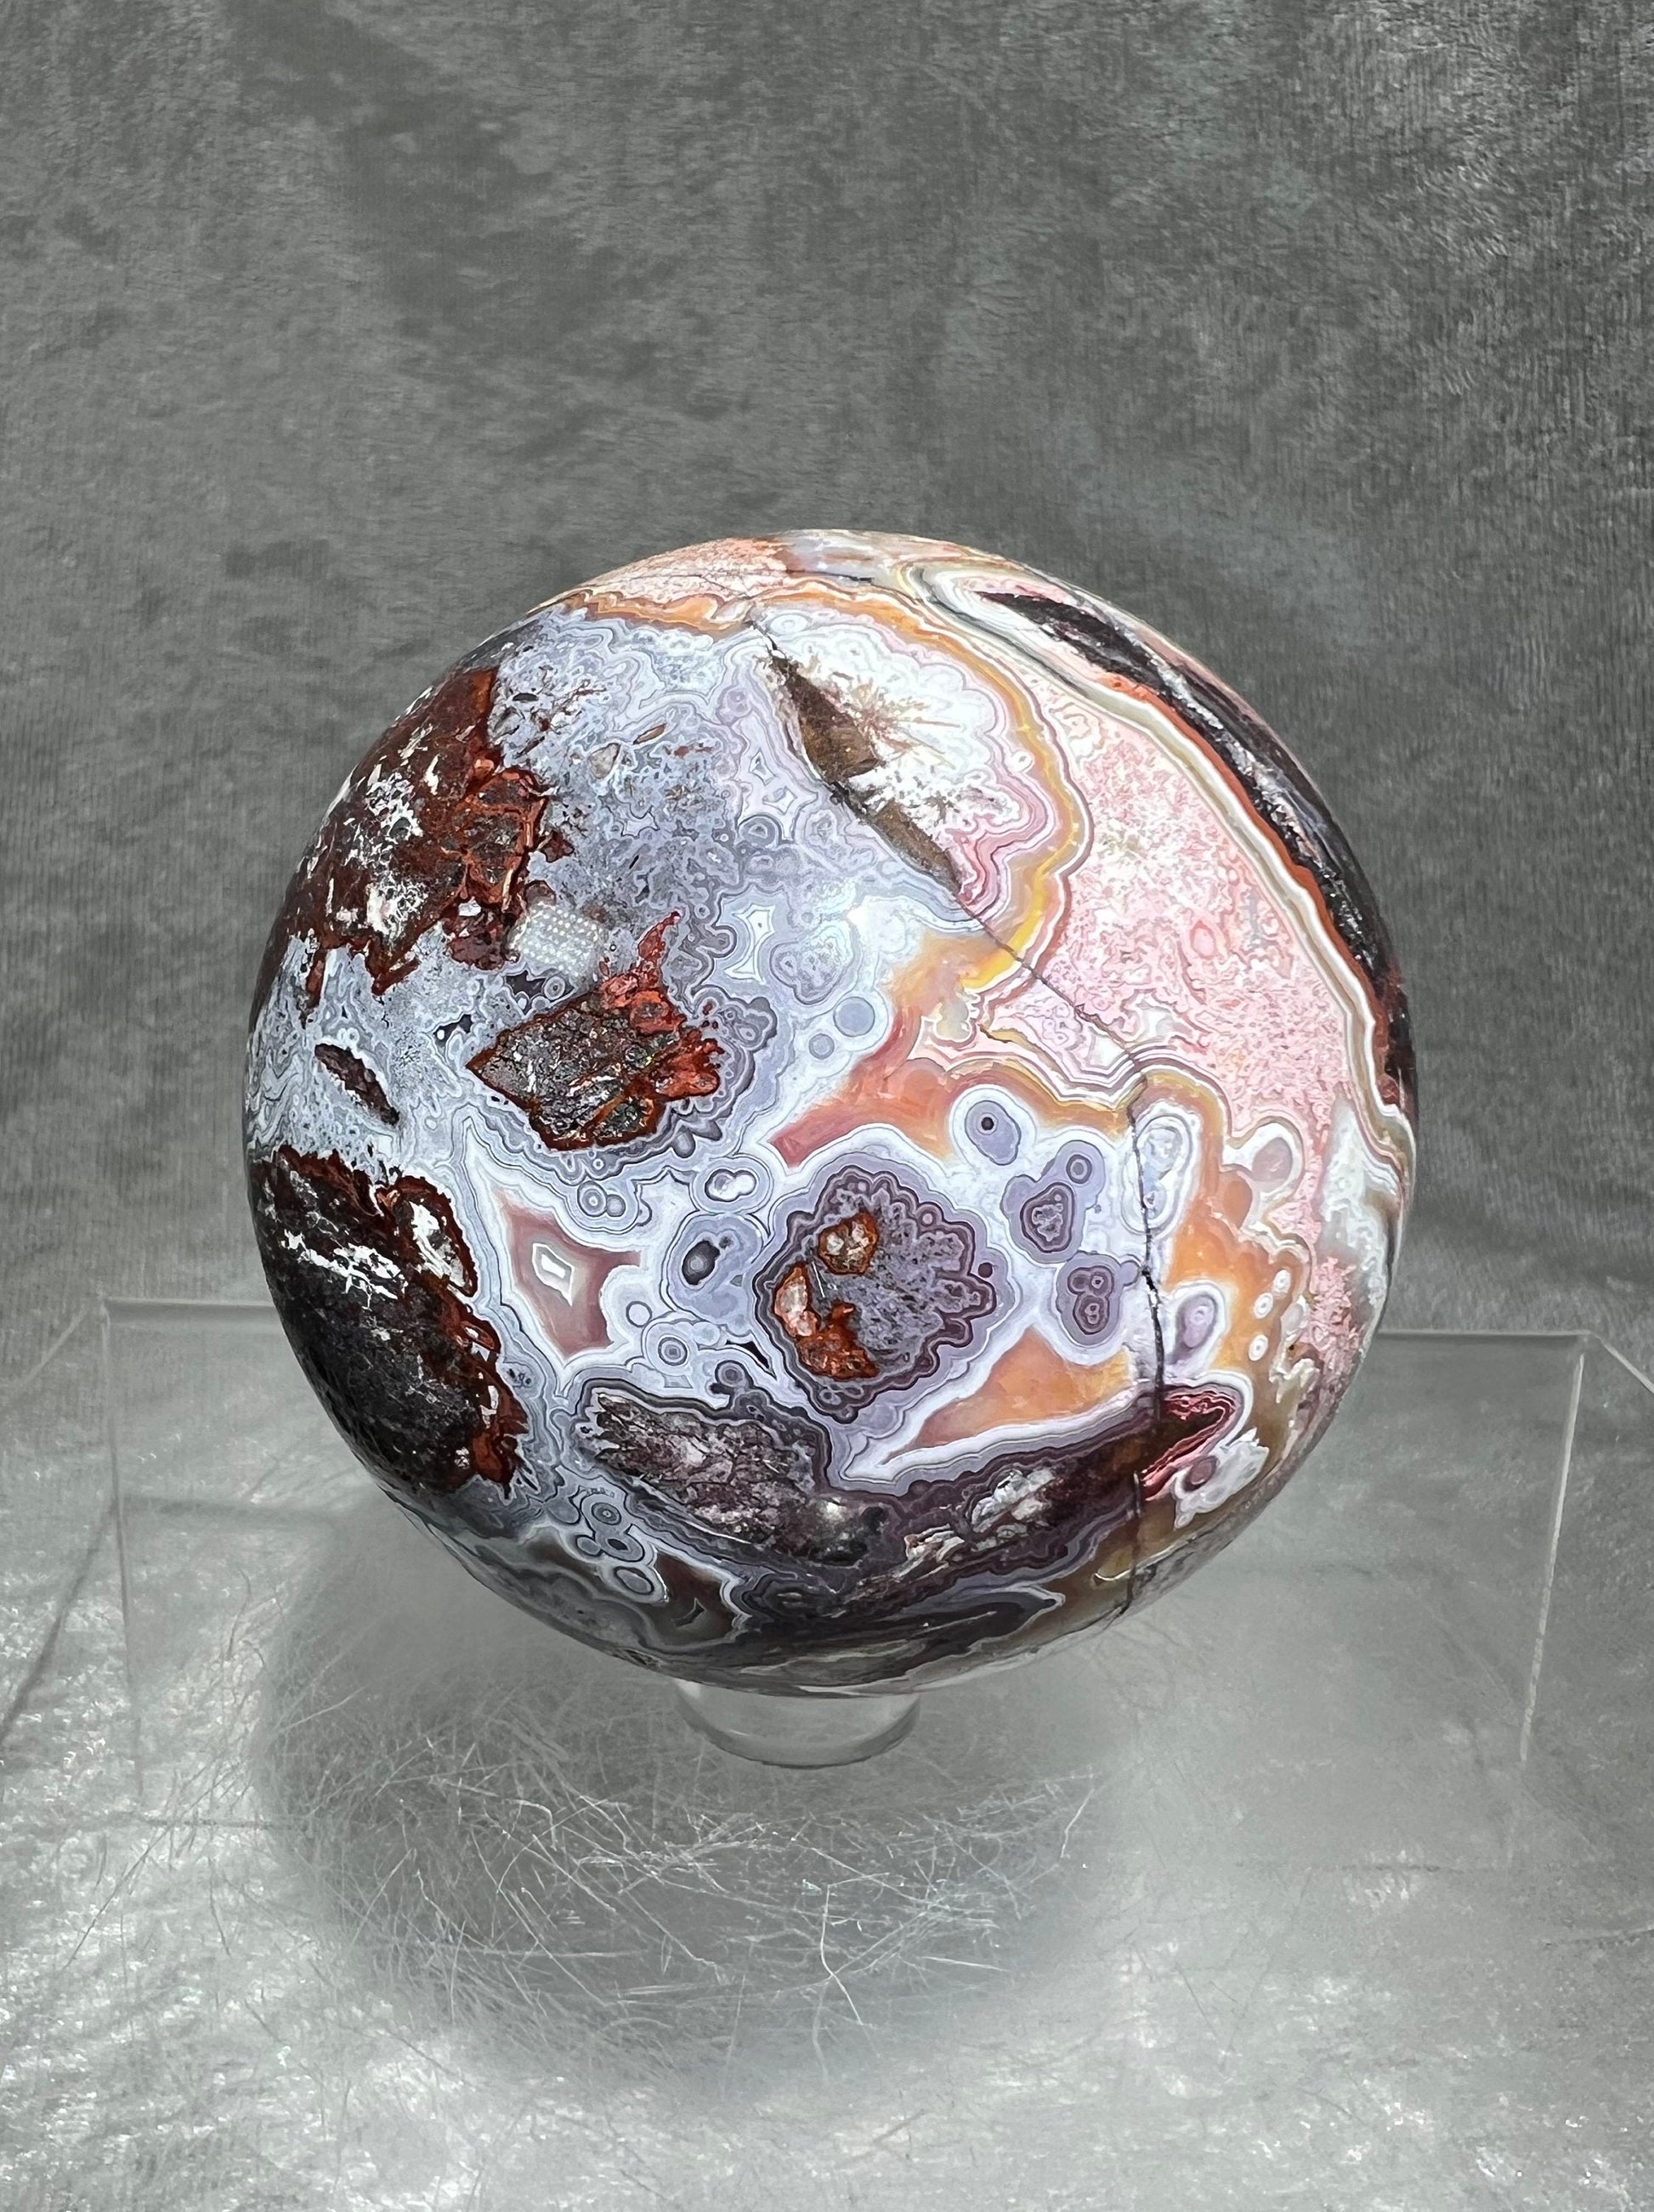 Druzy Mexican Crazy Lace Agate Sphere. 68mm. Beautiful Pinks And Purples With Incredible Patterns And Lacing.